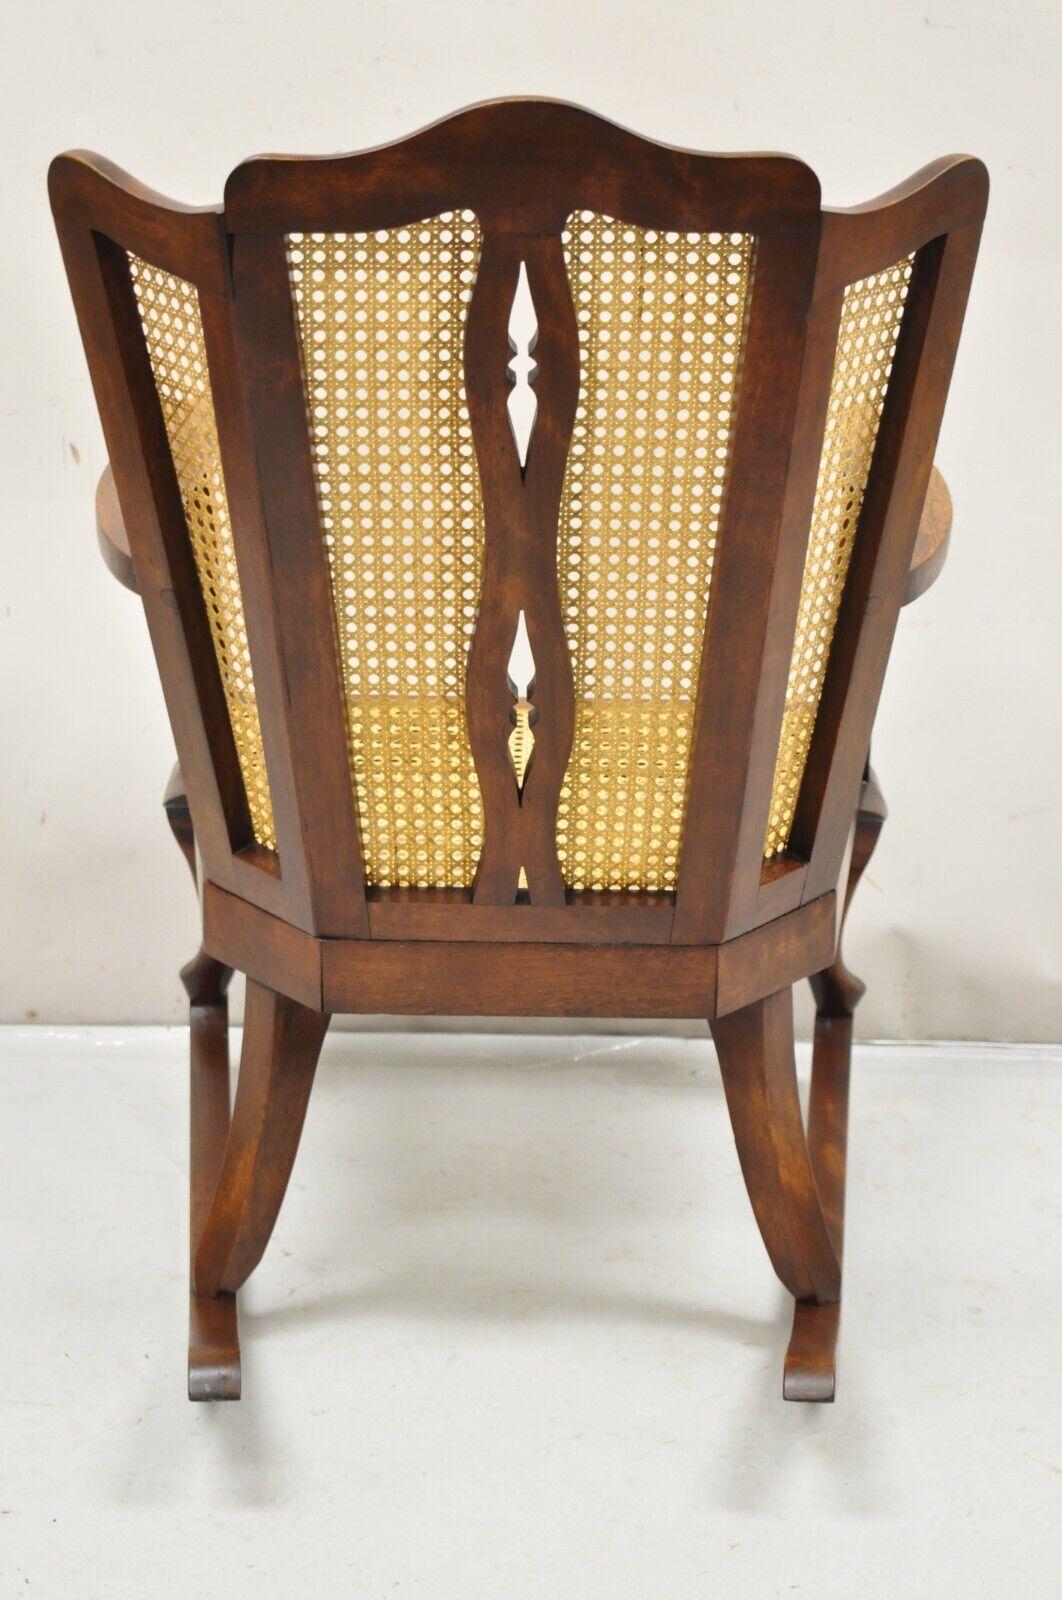 Early 20th Century Antique Victorian Walnut and Cane Carved Rocker Rocking Chair Queen Anne Legs For Sale